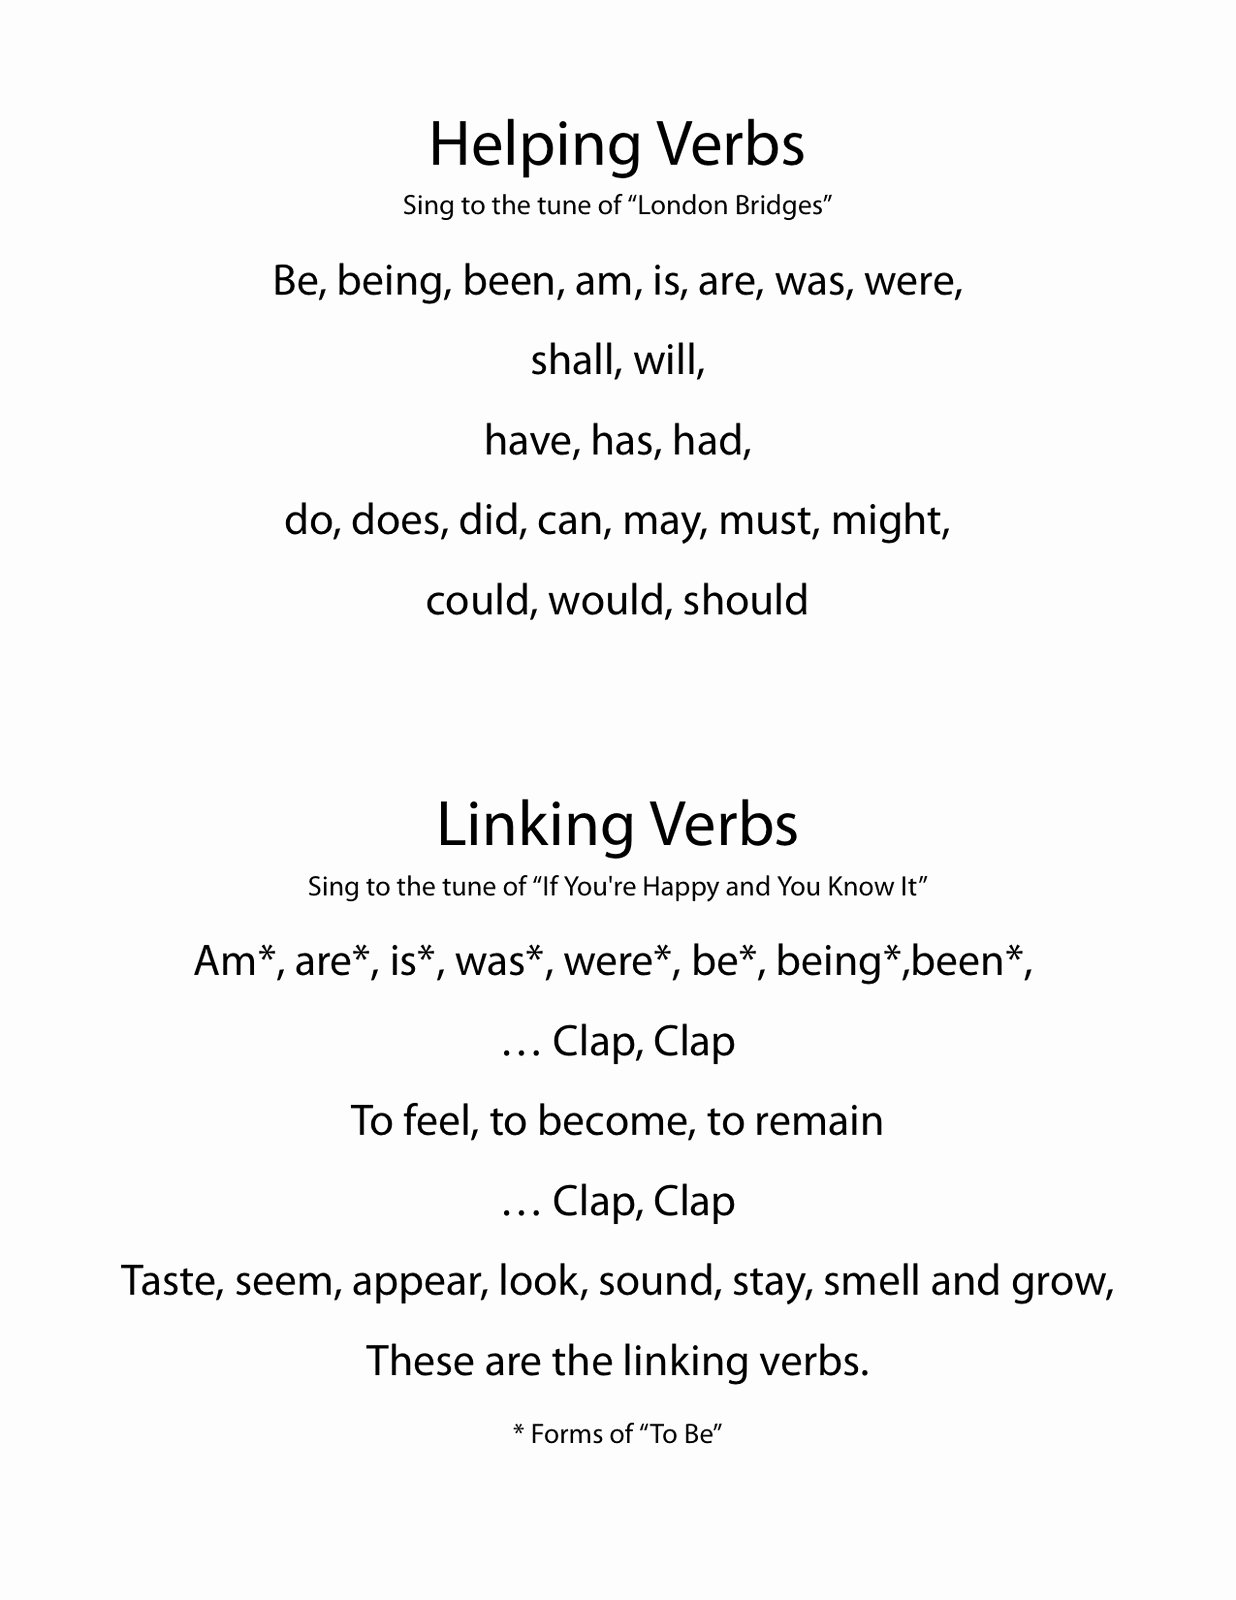 Linking and Helping Verbs Worksheet Awesome Candiland– Florida Classical Conversations Essentials Of